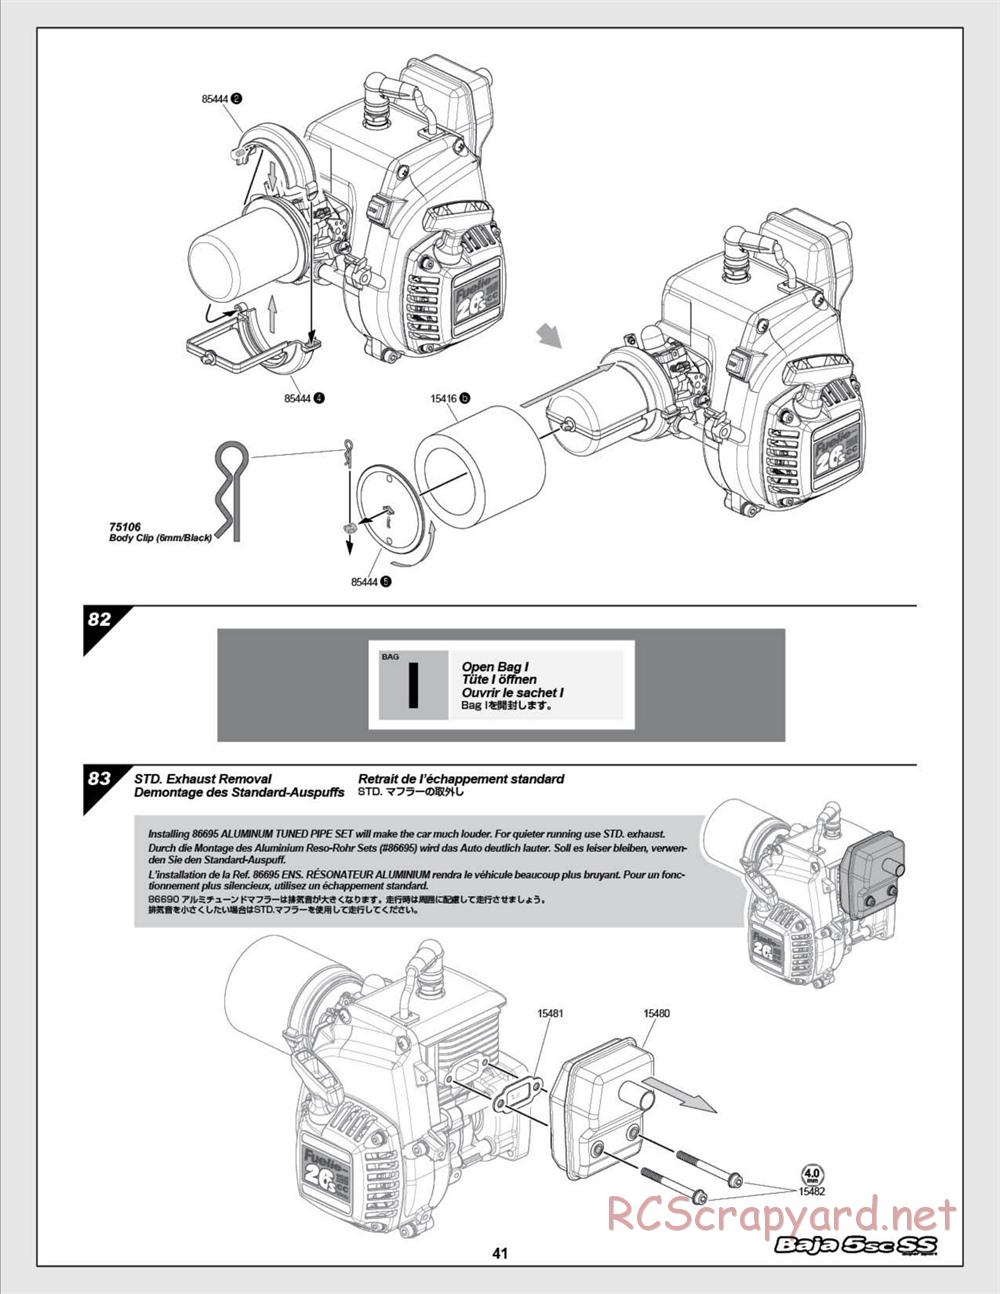 HPI - Baja 5SC SS - Exploded View - Page 41